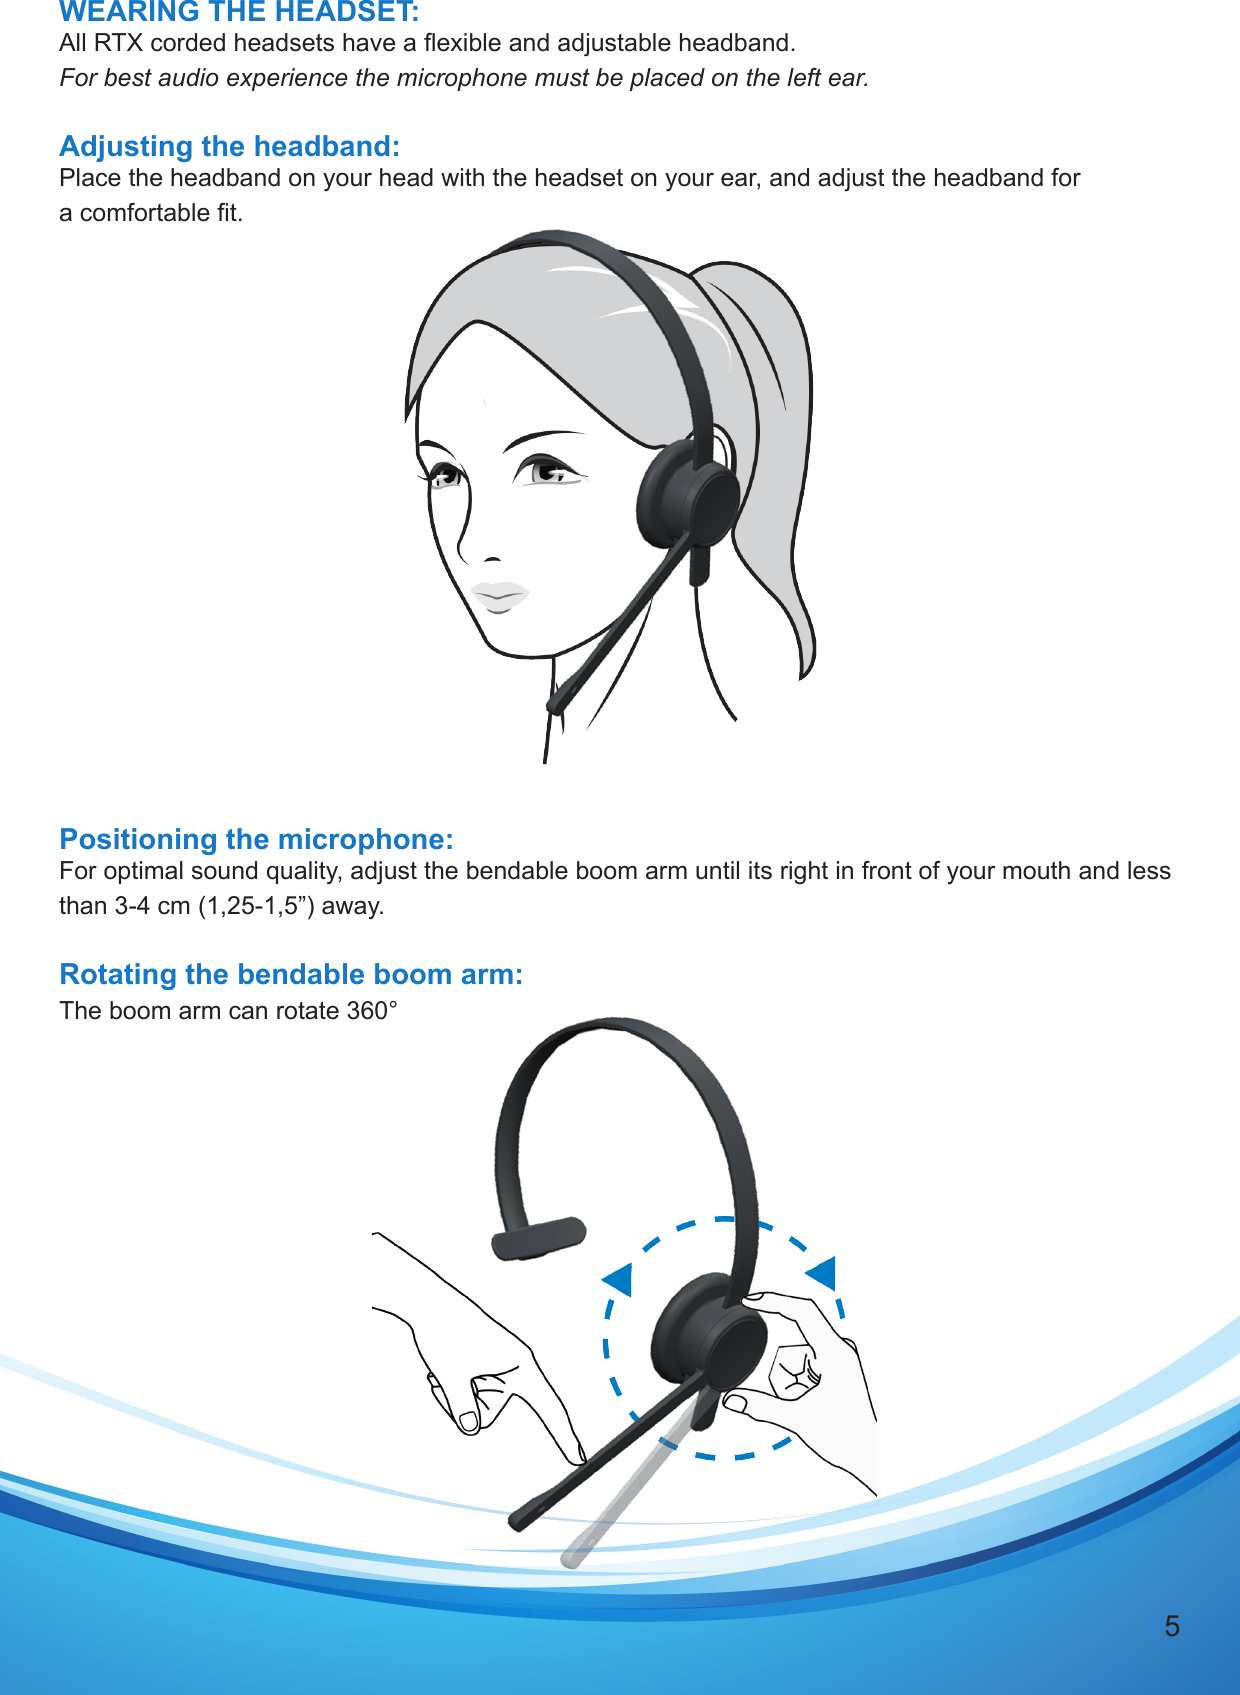 5WEARING THE HEADSET:All RTX corded headsets have a exible and adjustable headband.For best audio experience the microphone must be placed on the left ear.Adjusting the headband:Place the headband on your head with the headset on your ear, and adjust the headband for a comfortable t.Positioning the microphone:For optimal sound quality, adjust the bendable boom arm until its right in front of your mouth and less than 3-4 cm (1,25-1,5”) away.Rotating the bendable boom arm: The boom arm can rotate 360°